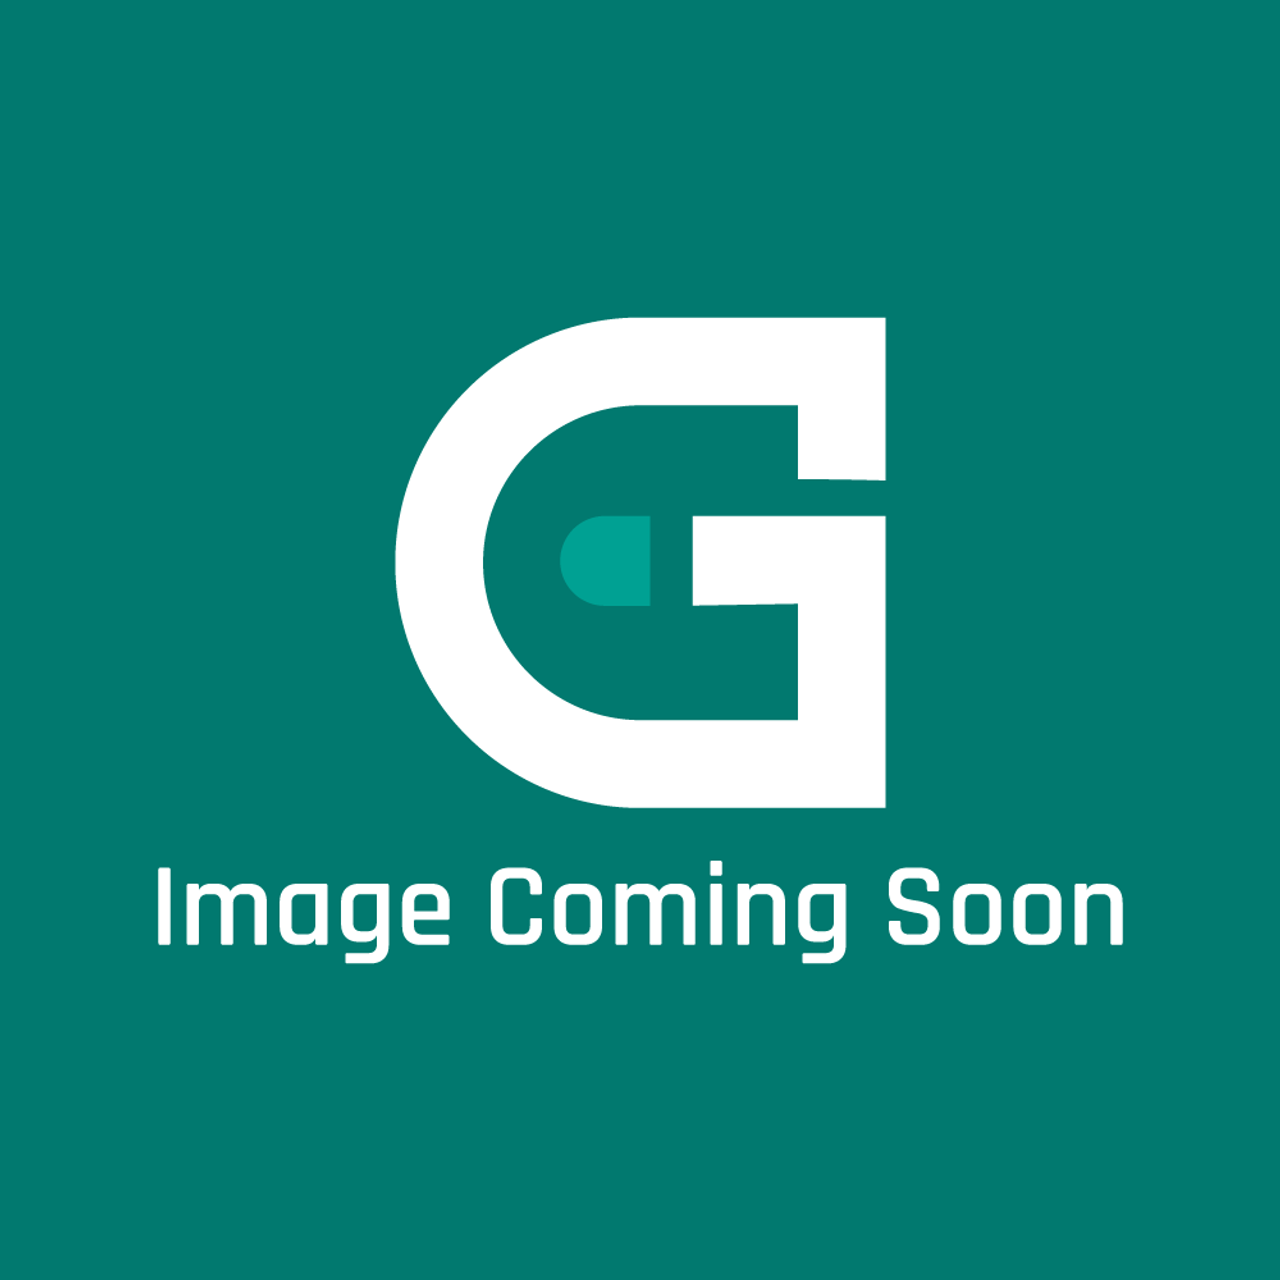 Frigidaire - Electrolux 5304521226 Display - Image Coming Soon!